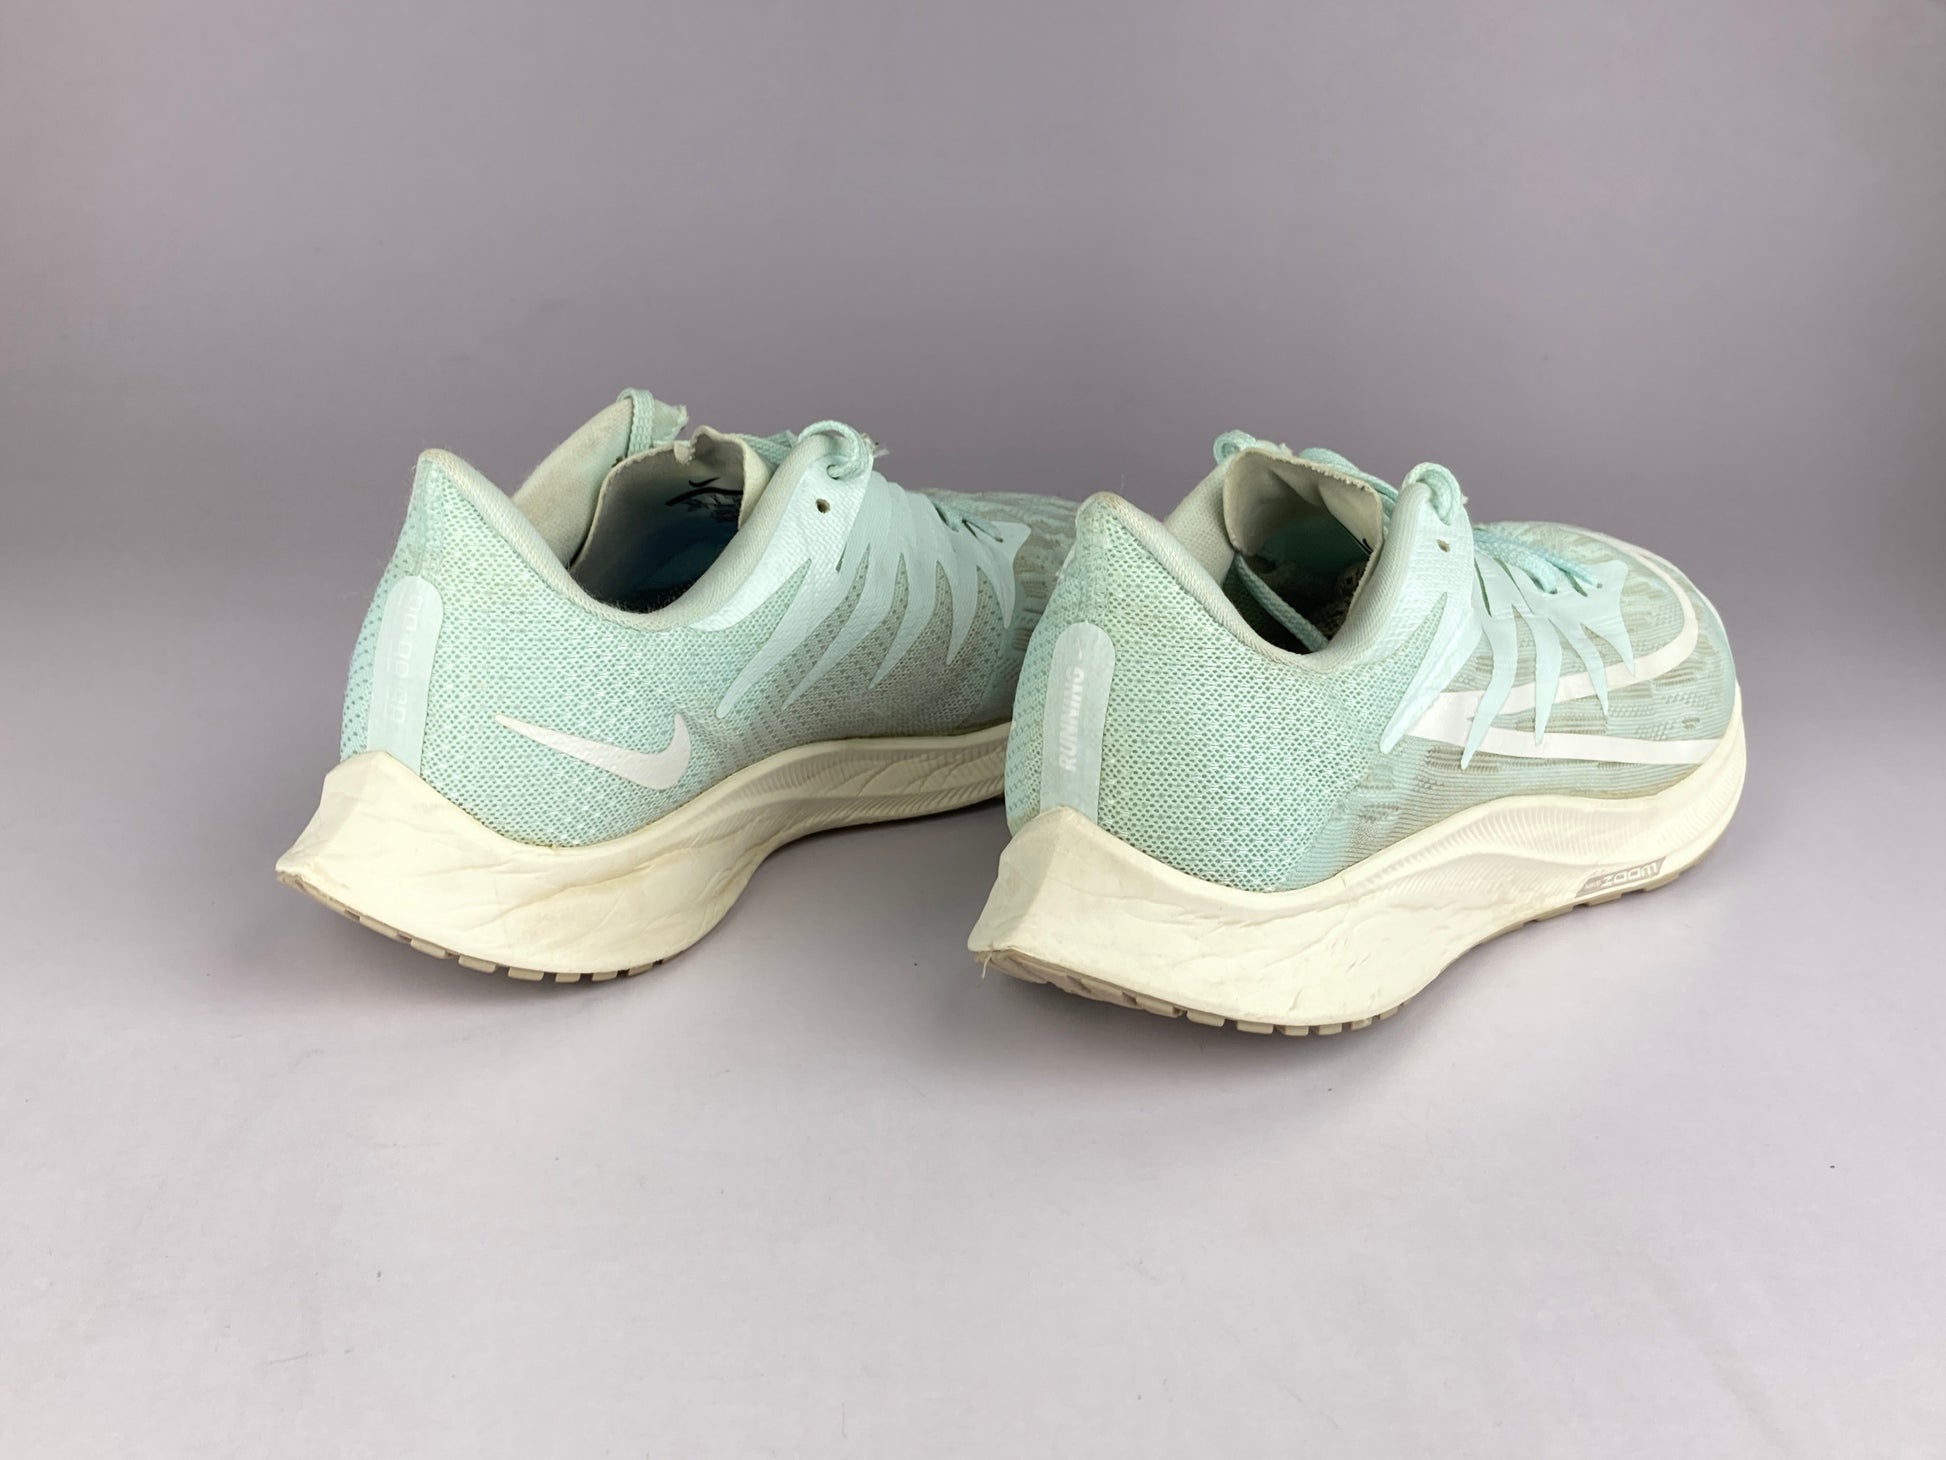 Nike Wmns Zoom Rival Fly 'Aqua Teal/Sky Blue/White' cd7287-300-Running-Athletic Corner